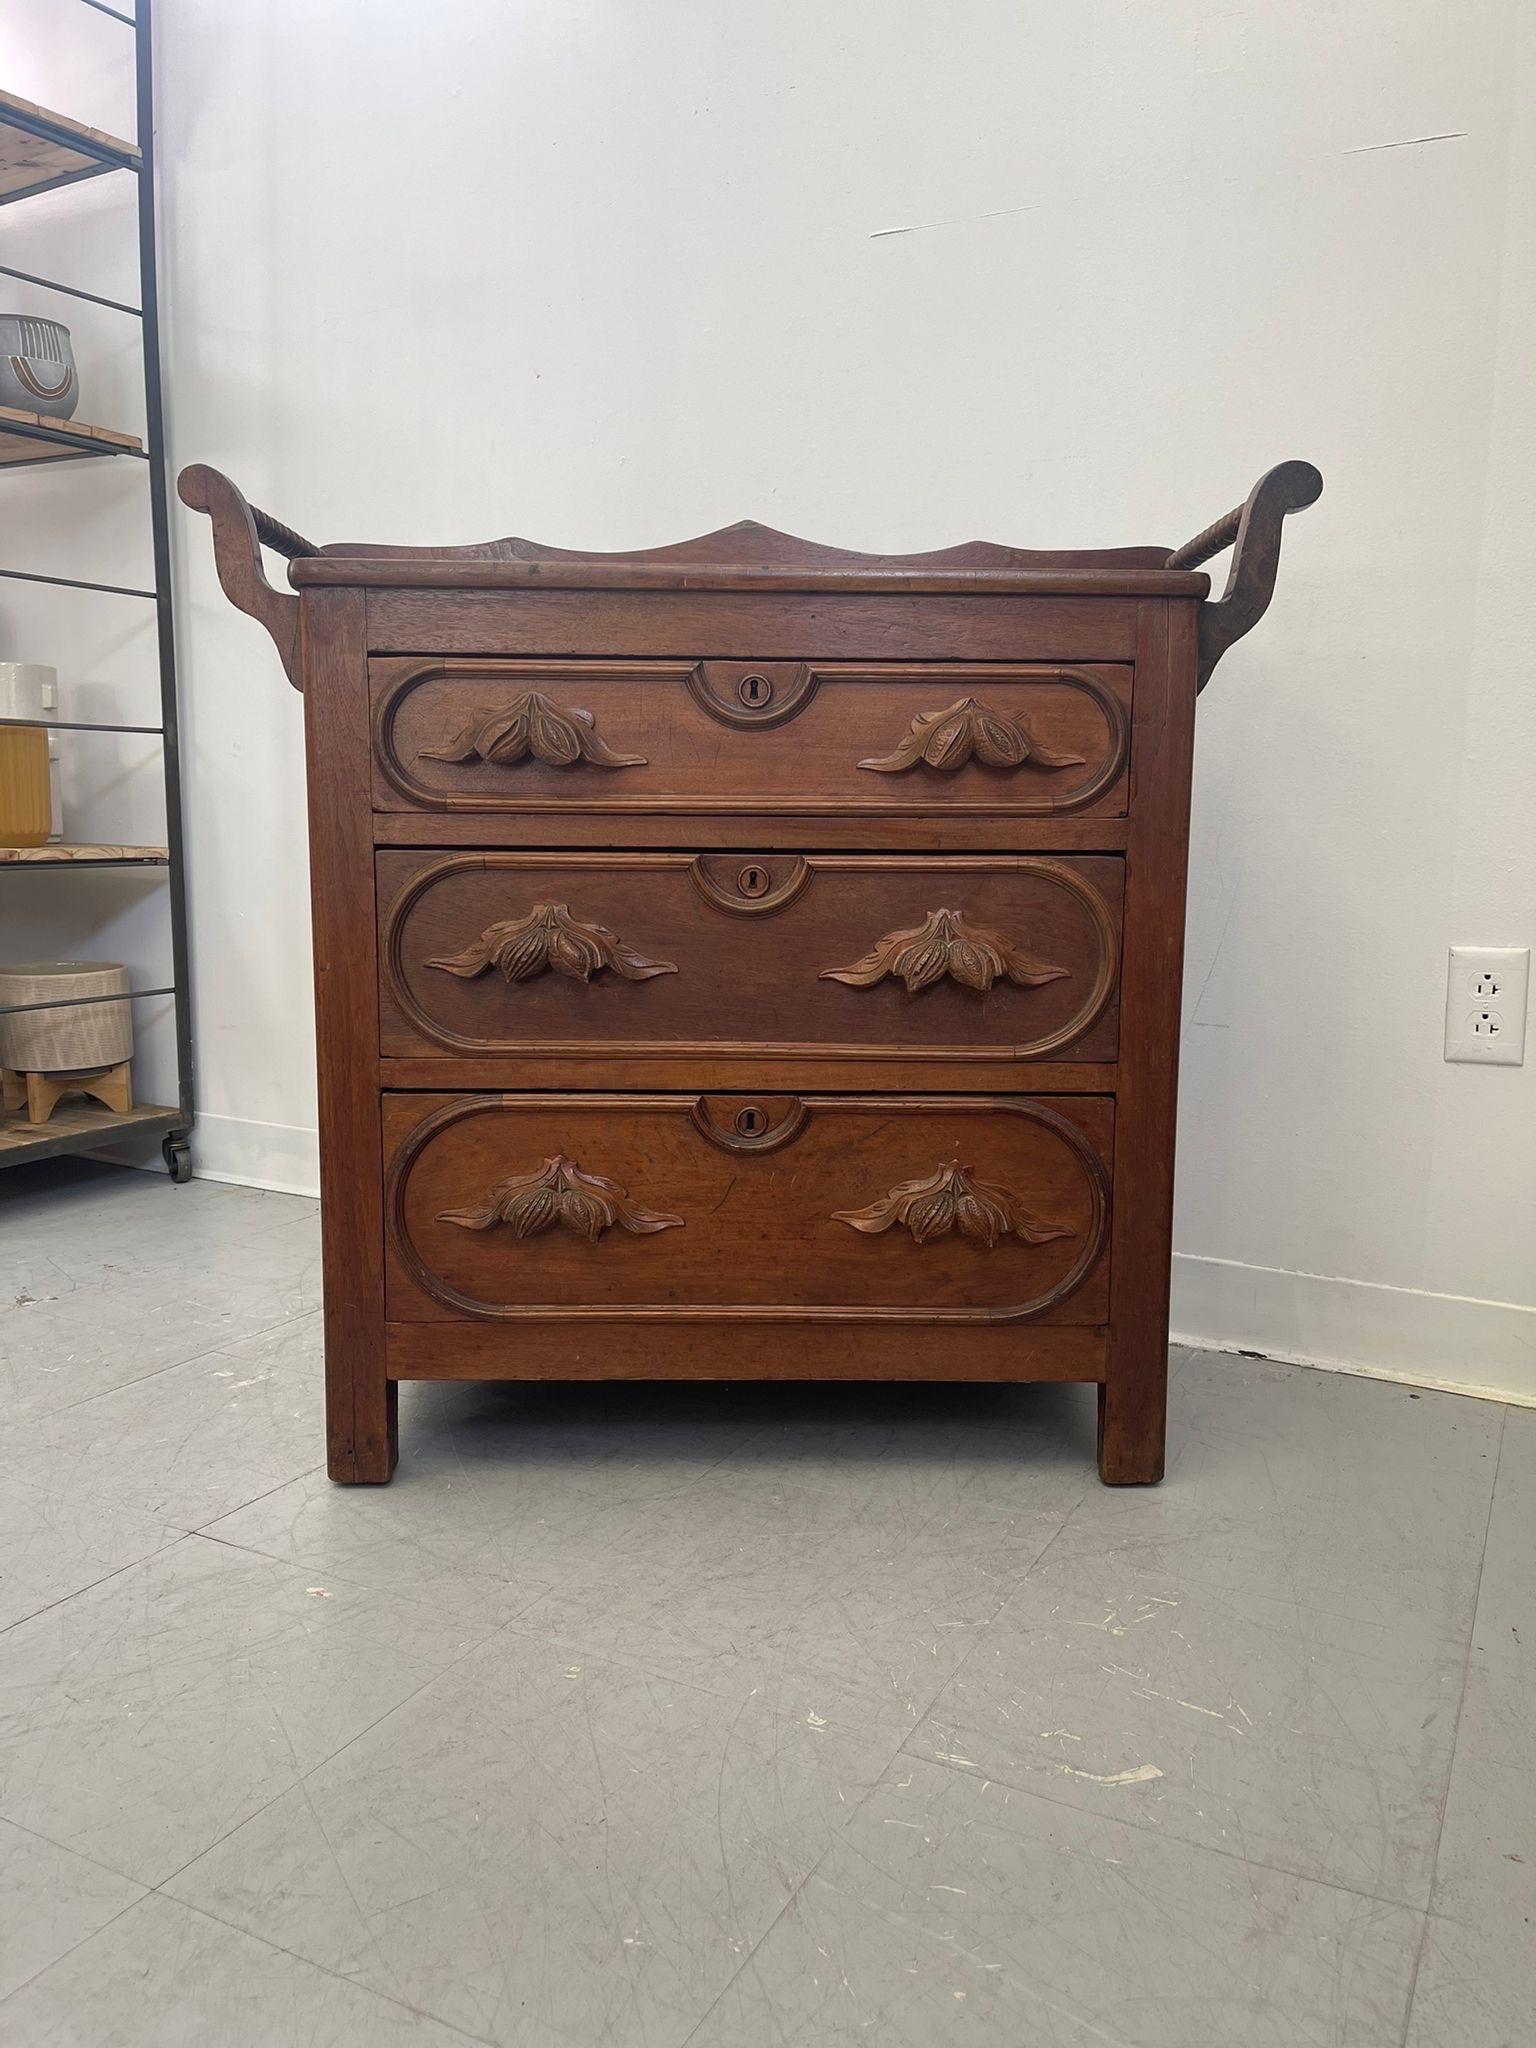 Early Victorian Vintage Eastlake Victorian Style Dresser With Hand Carved Accents. For Sale